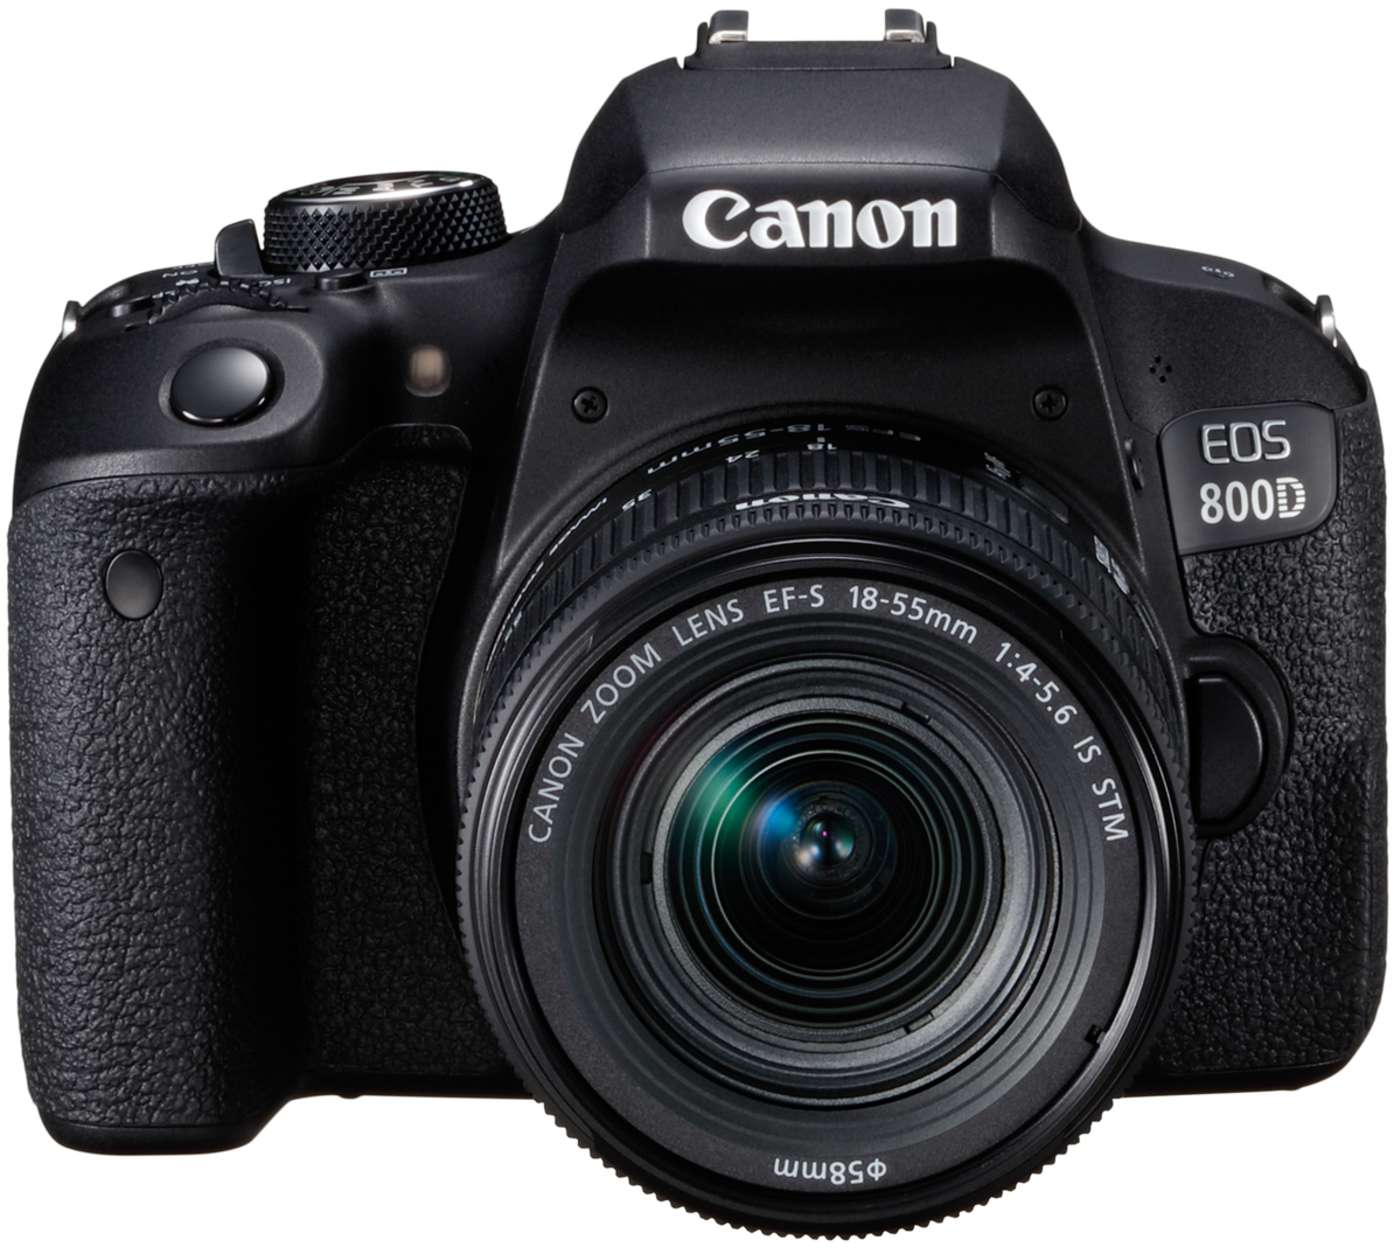 Best camera for entry level - Canon EOS 800D